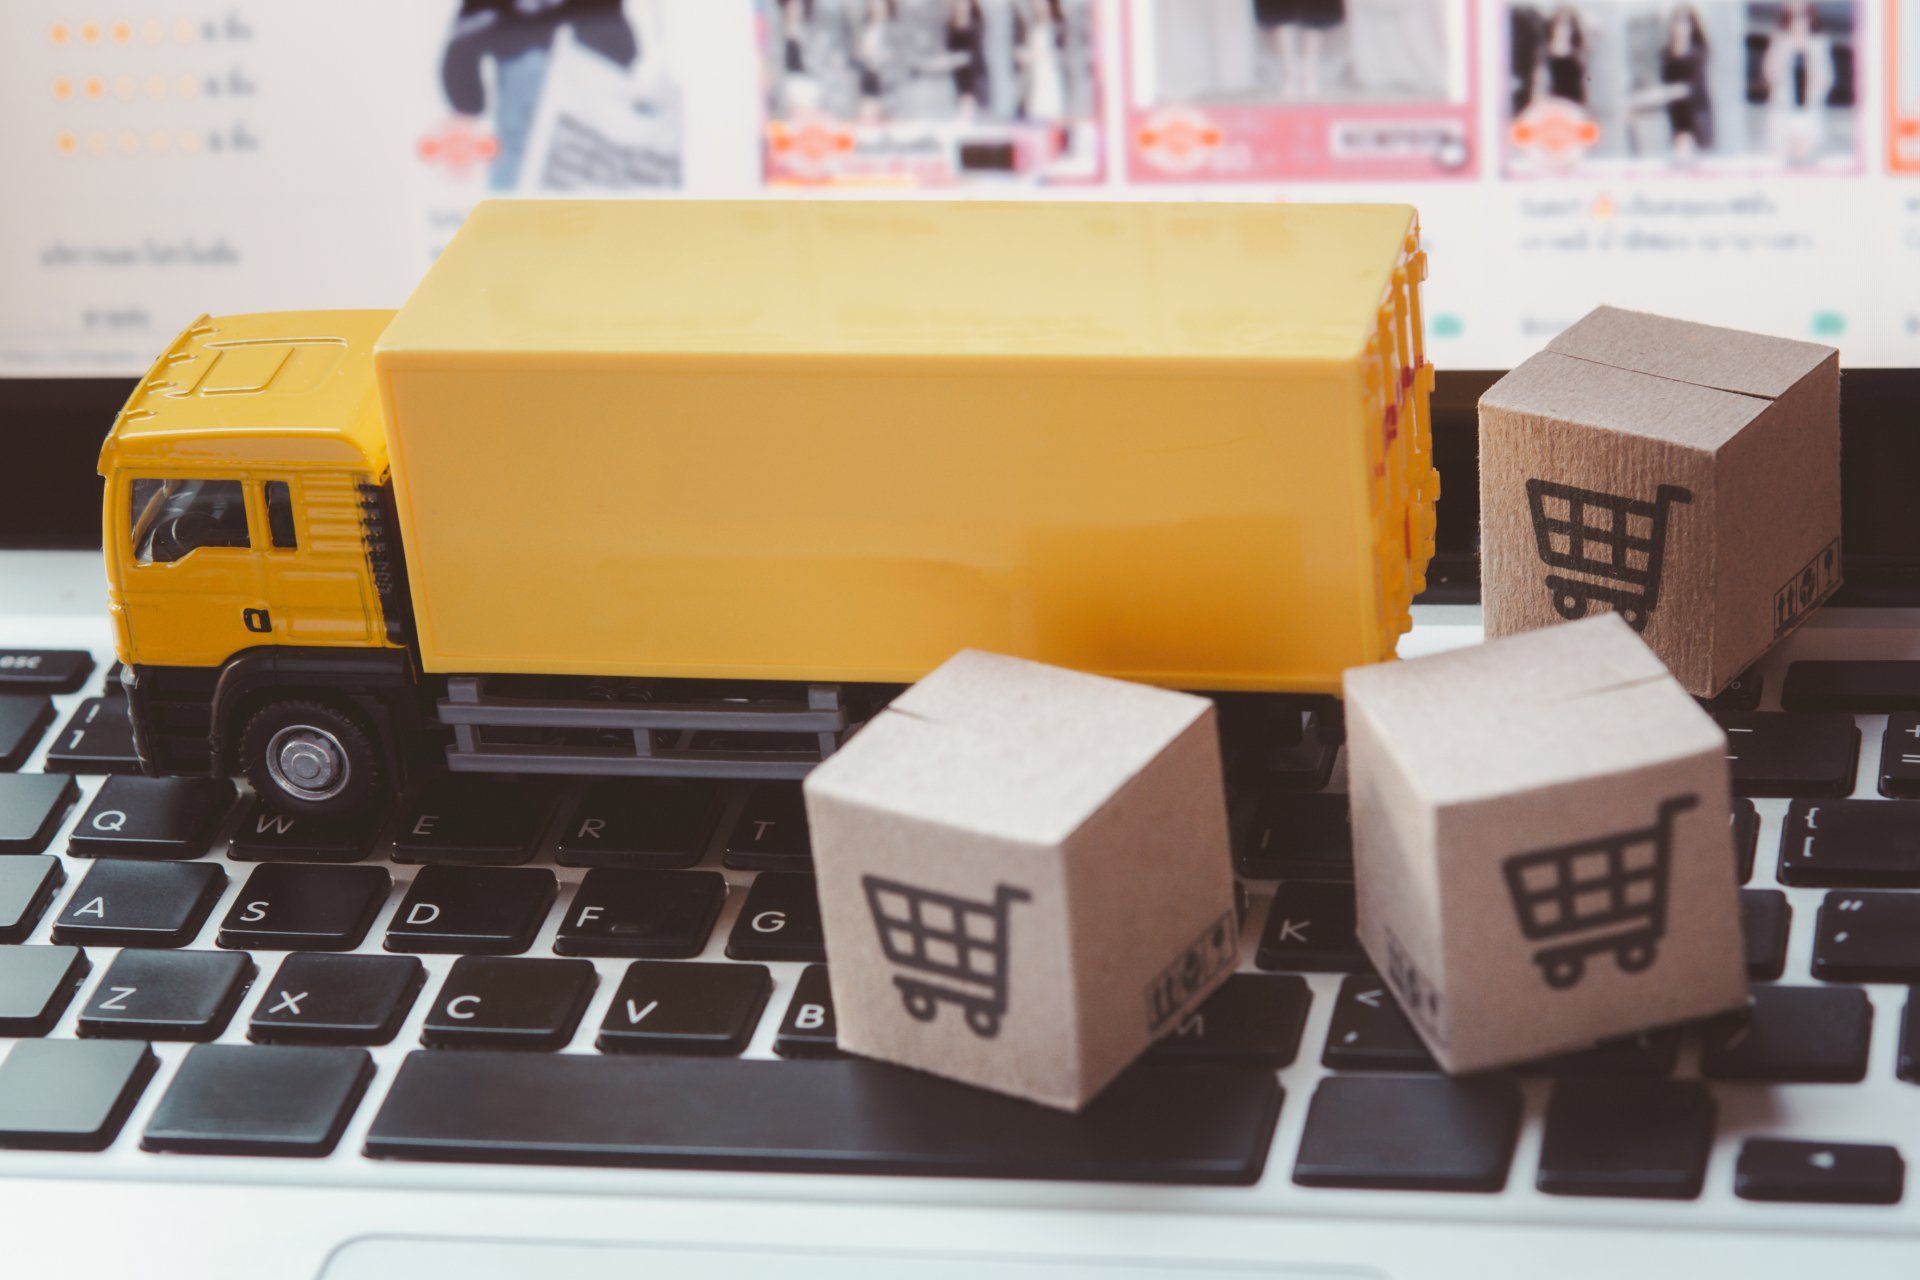 Truck and paper cartons or parcel with a shopping cart logo on a laptop keyboard